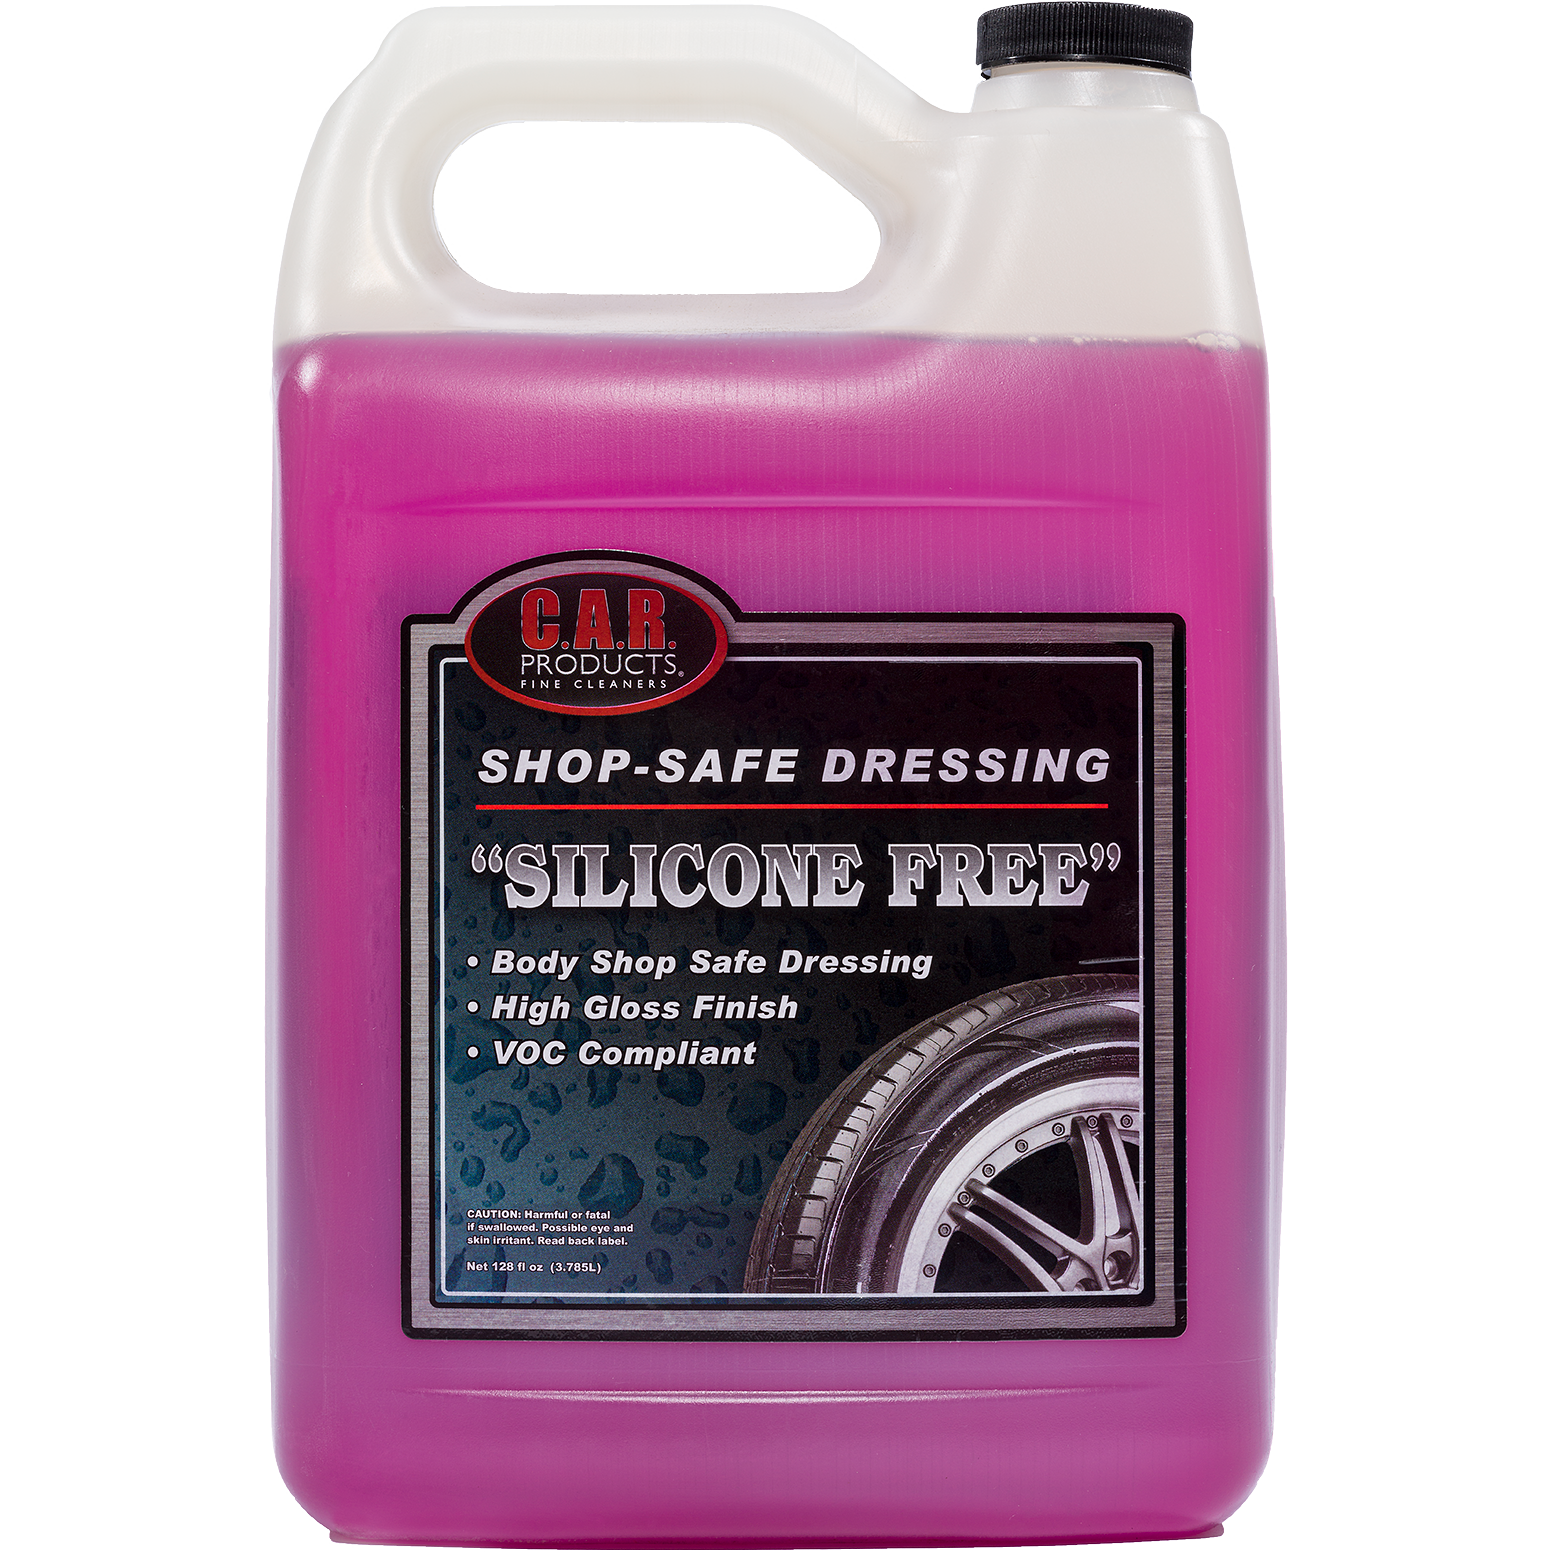 XCP CAR-20901 CAR Products Shop-Safe "Silicone Free" Dressing (1 gal)